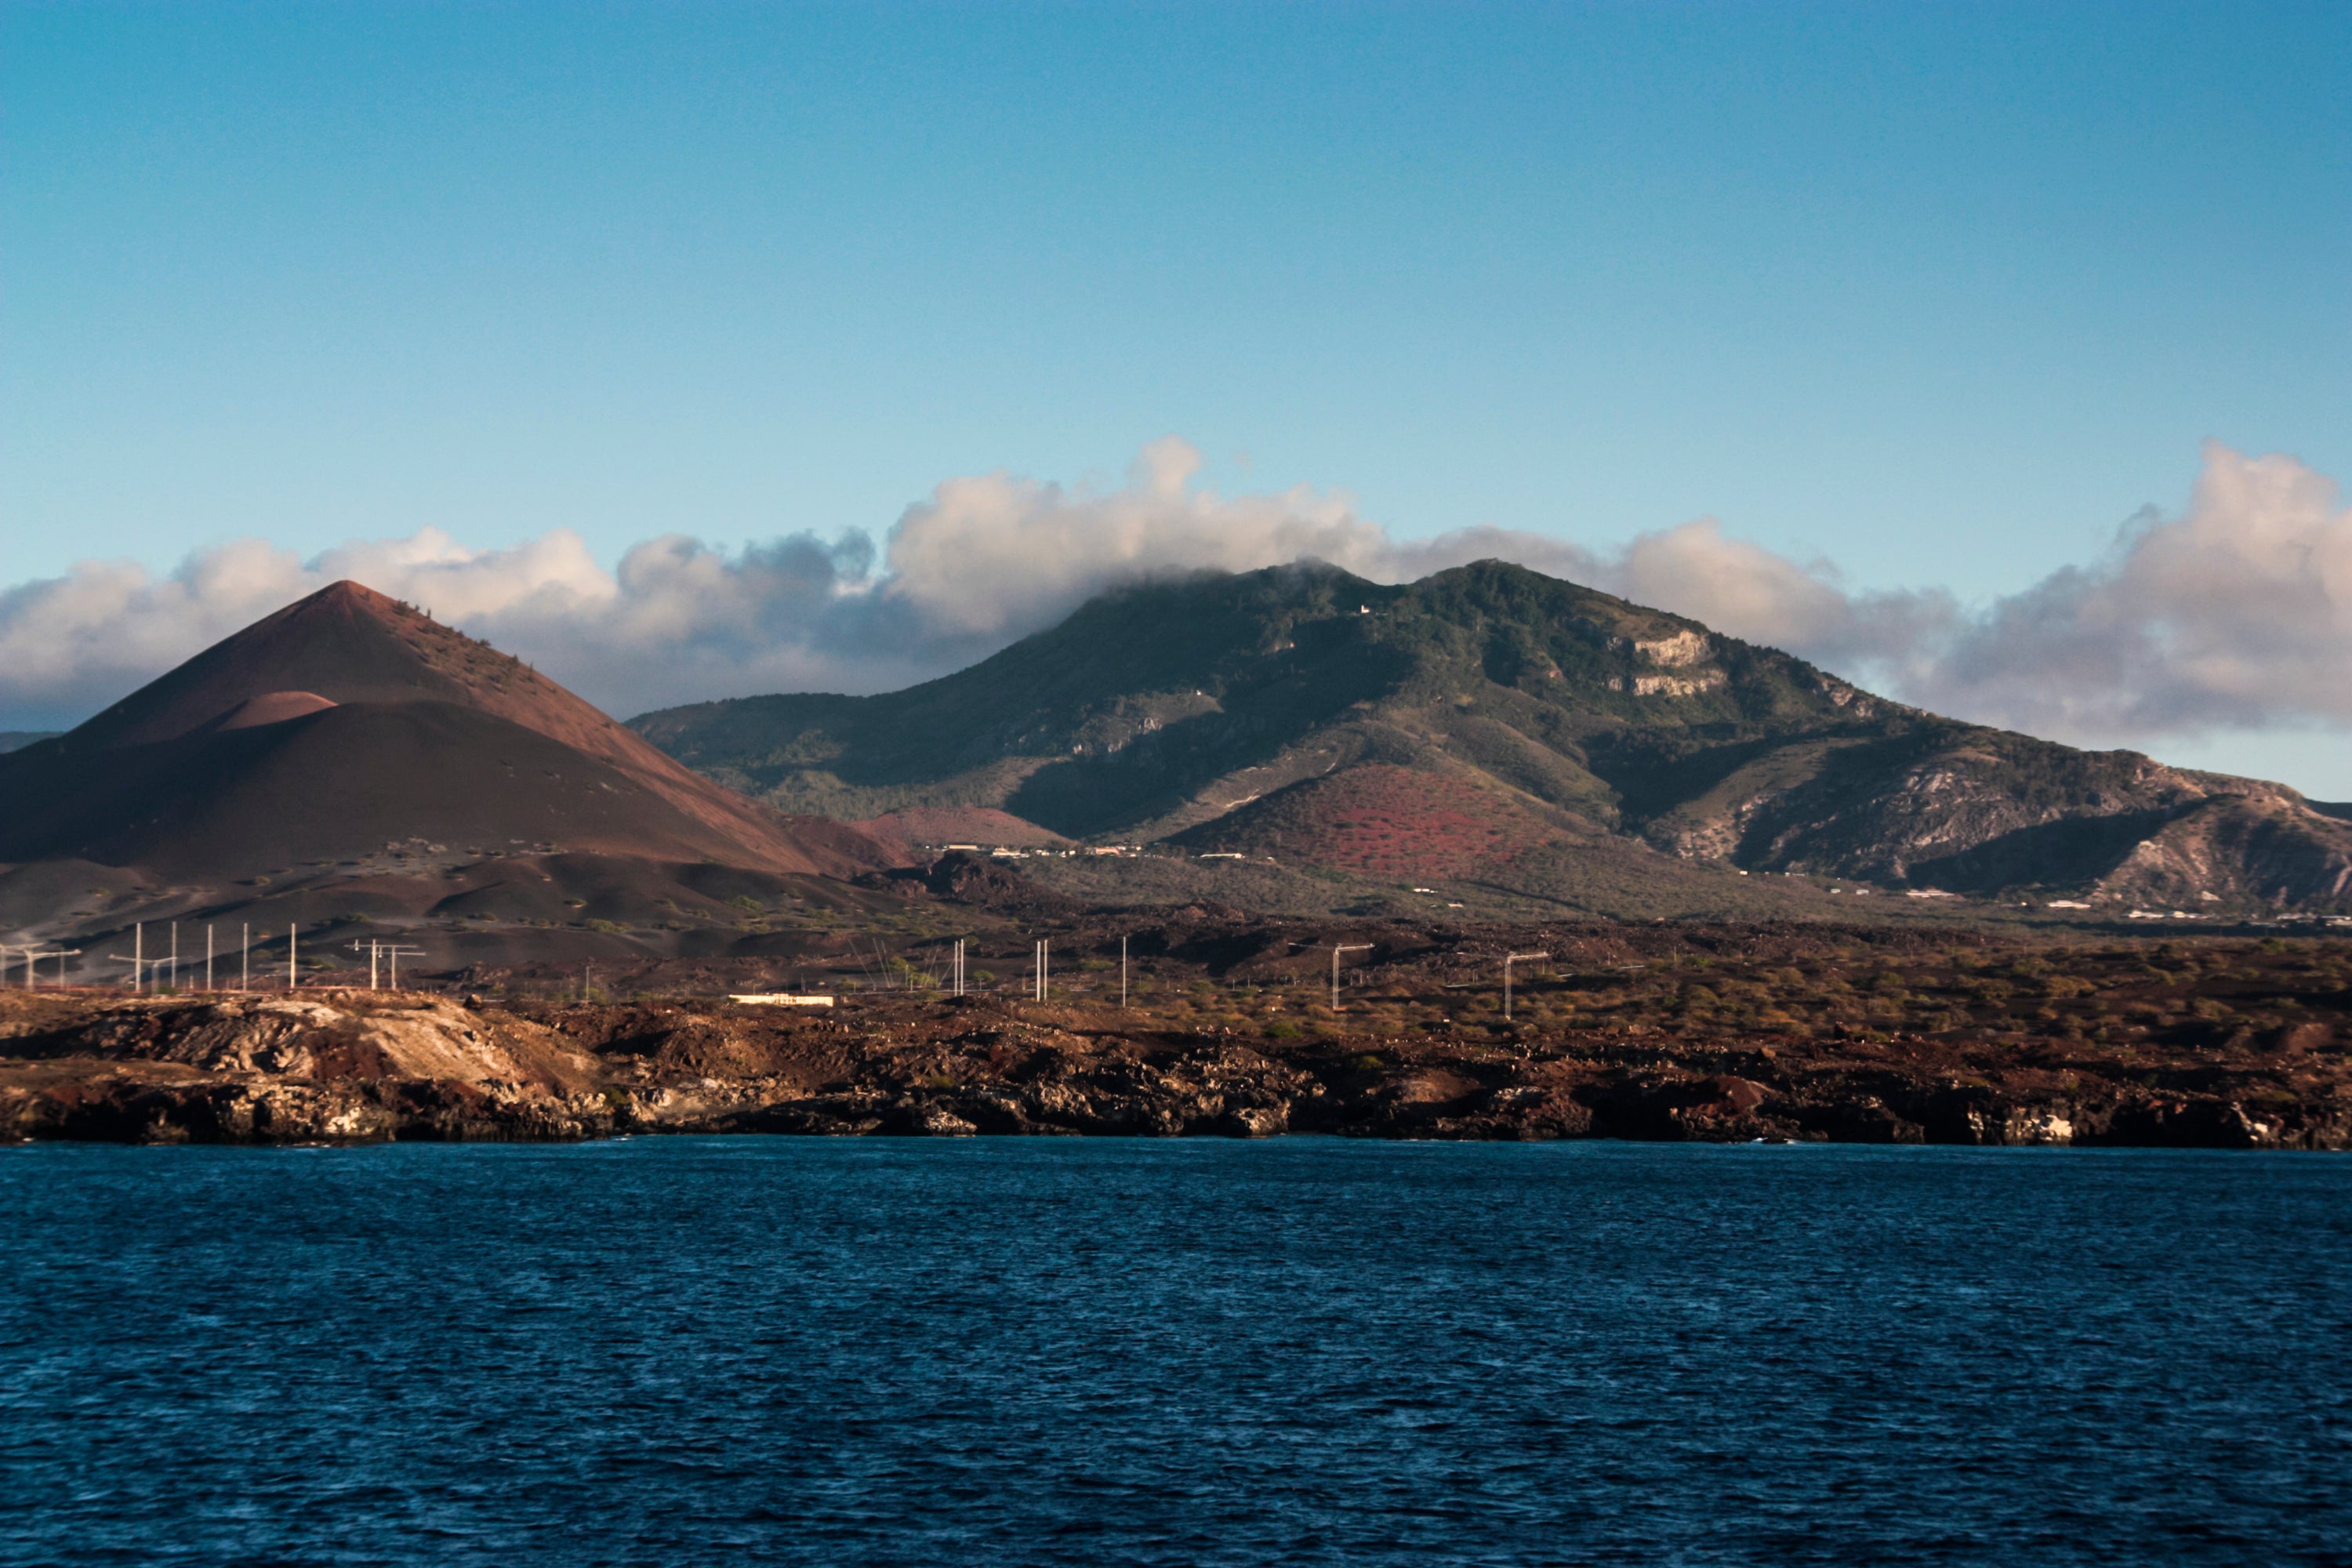 Various radar and radio masts are visible in the lava fields on Ascension Island, with Green Mountain in the background